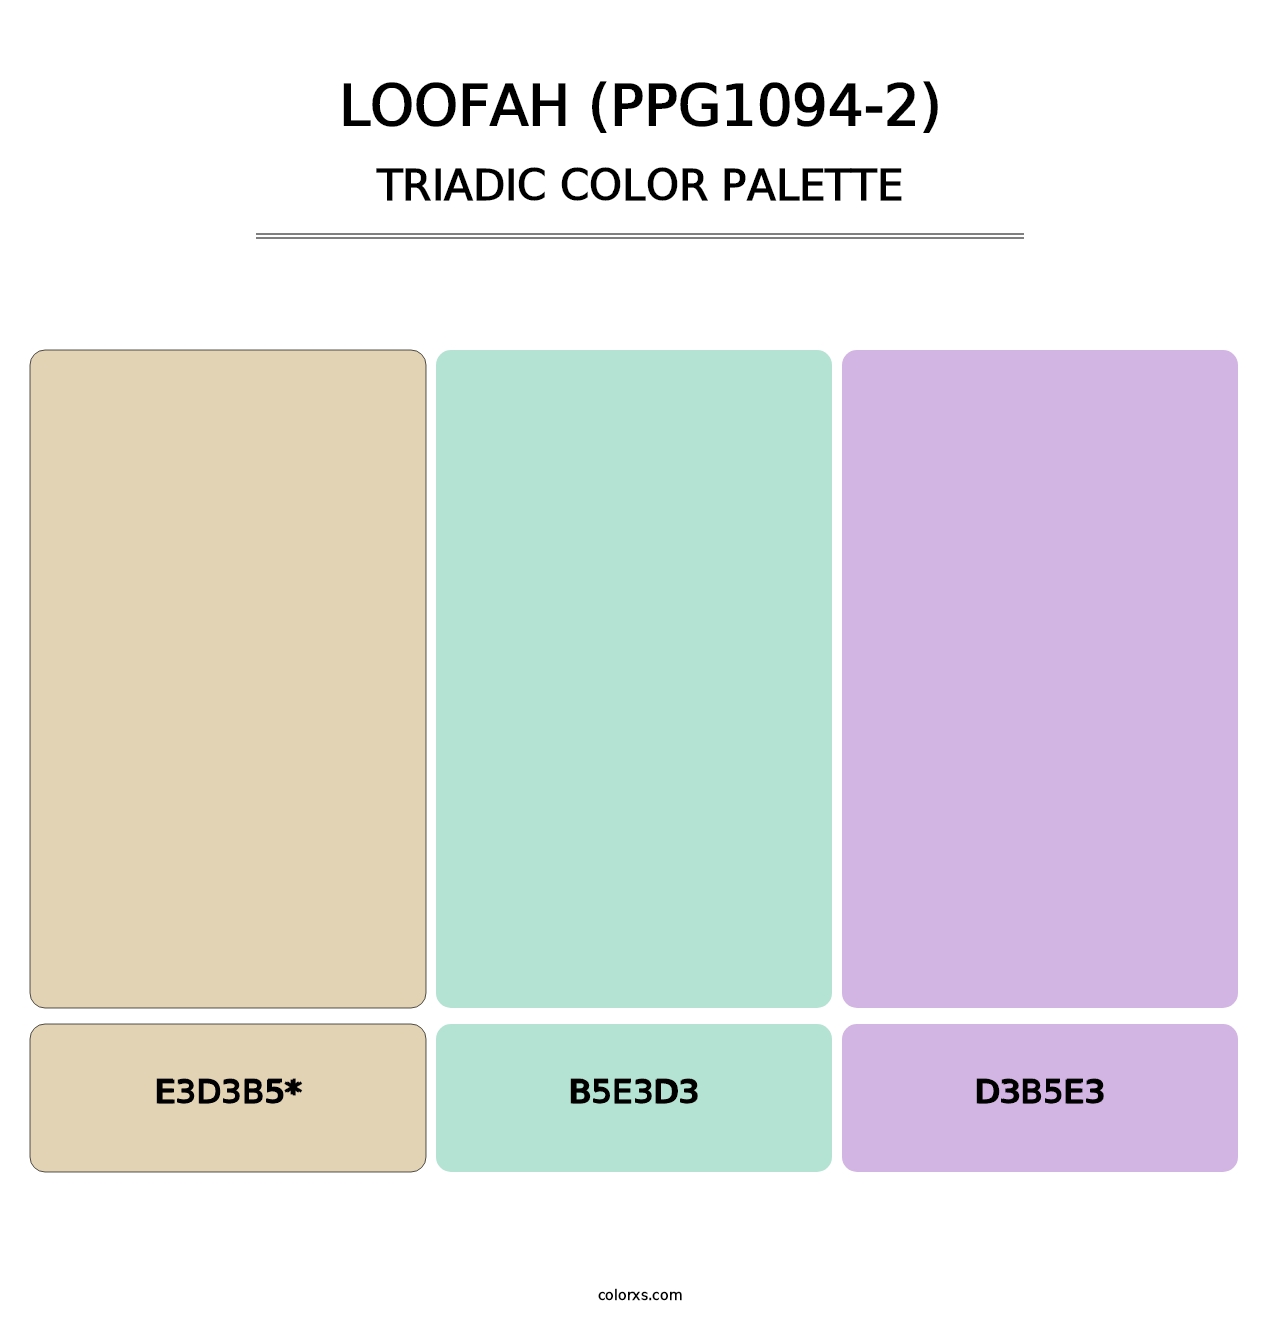 Loofah (PPG1094-2) - Triadic Color Palette